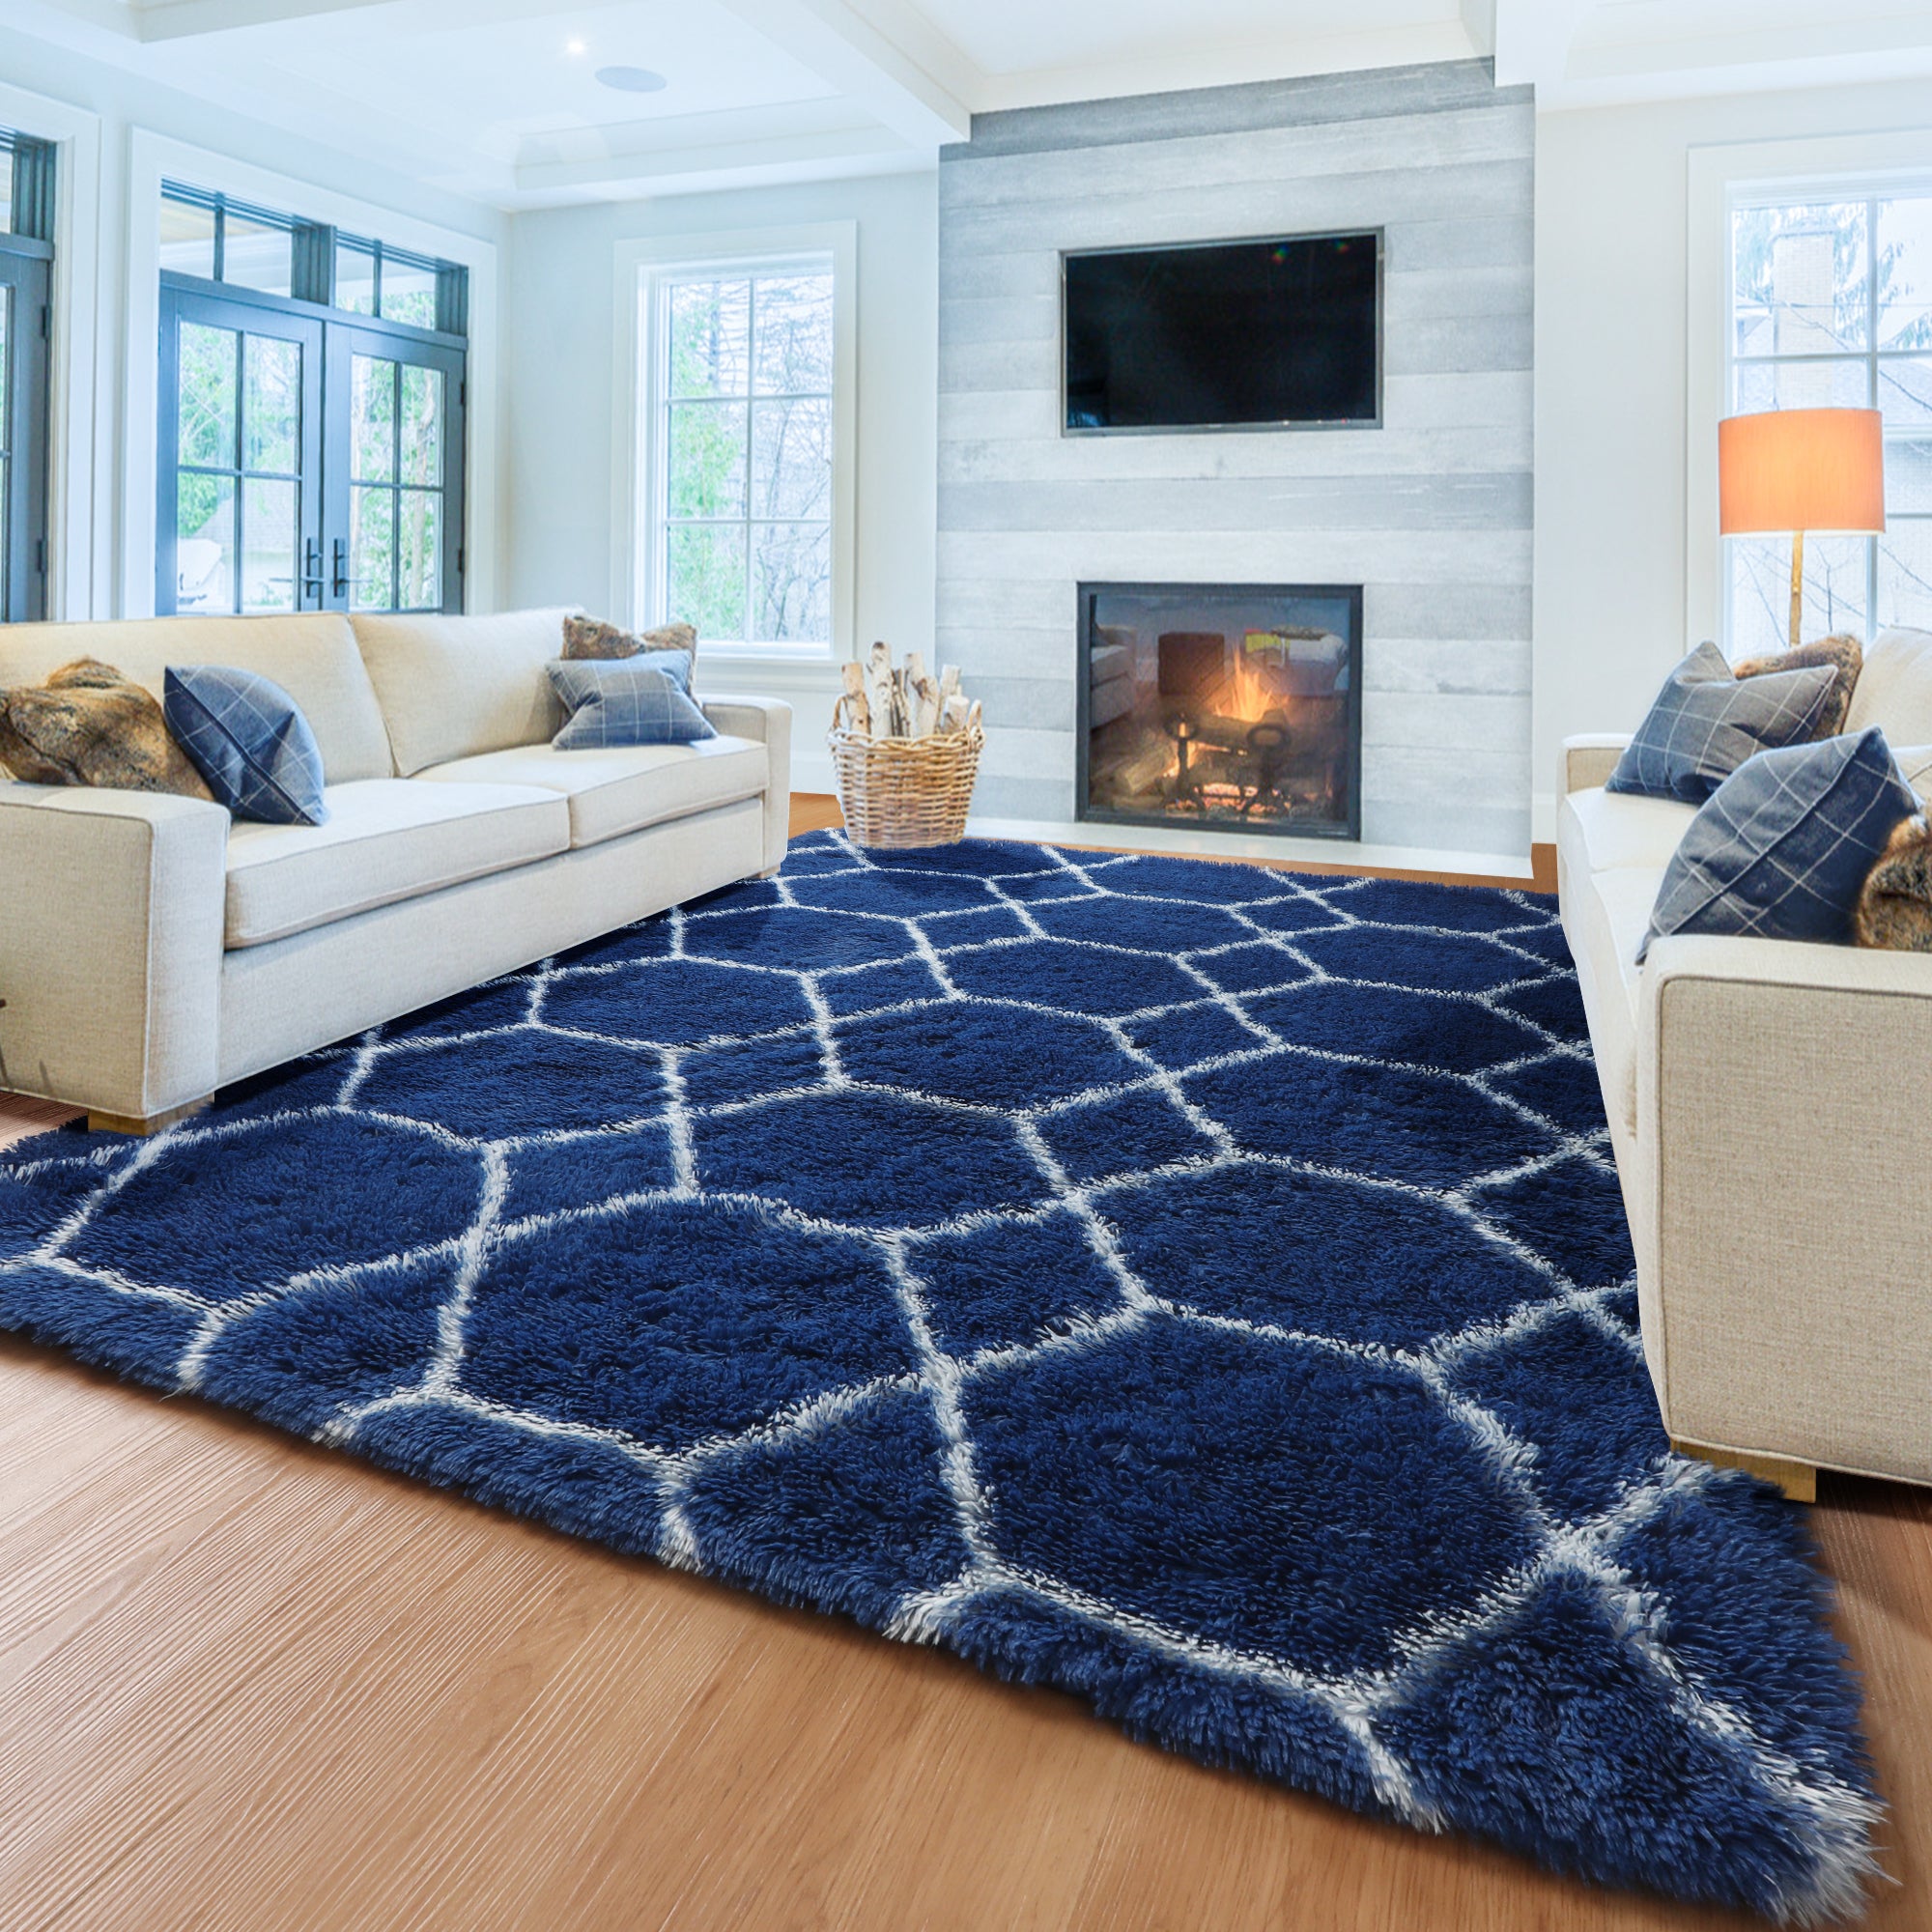 Fluffy Moroccan Navy and White Rugs